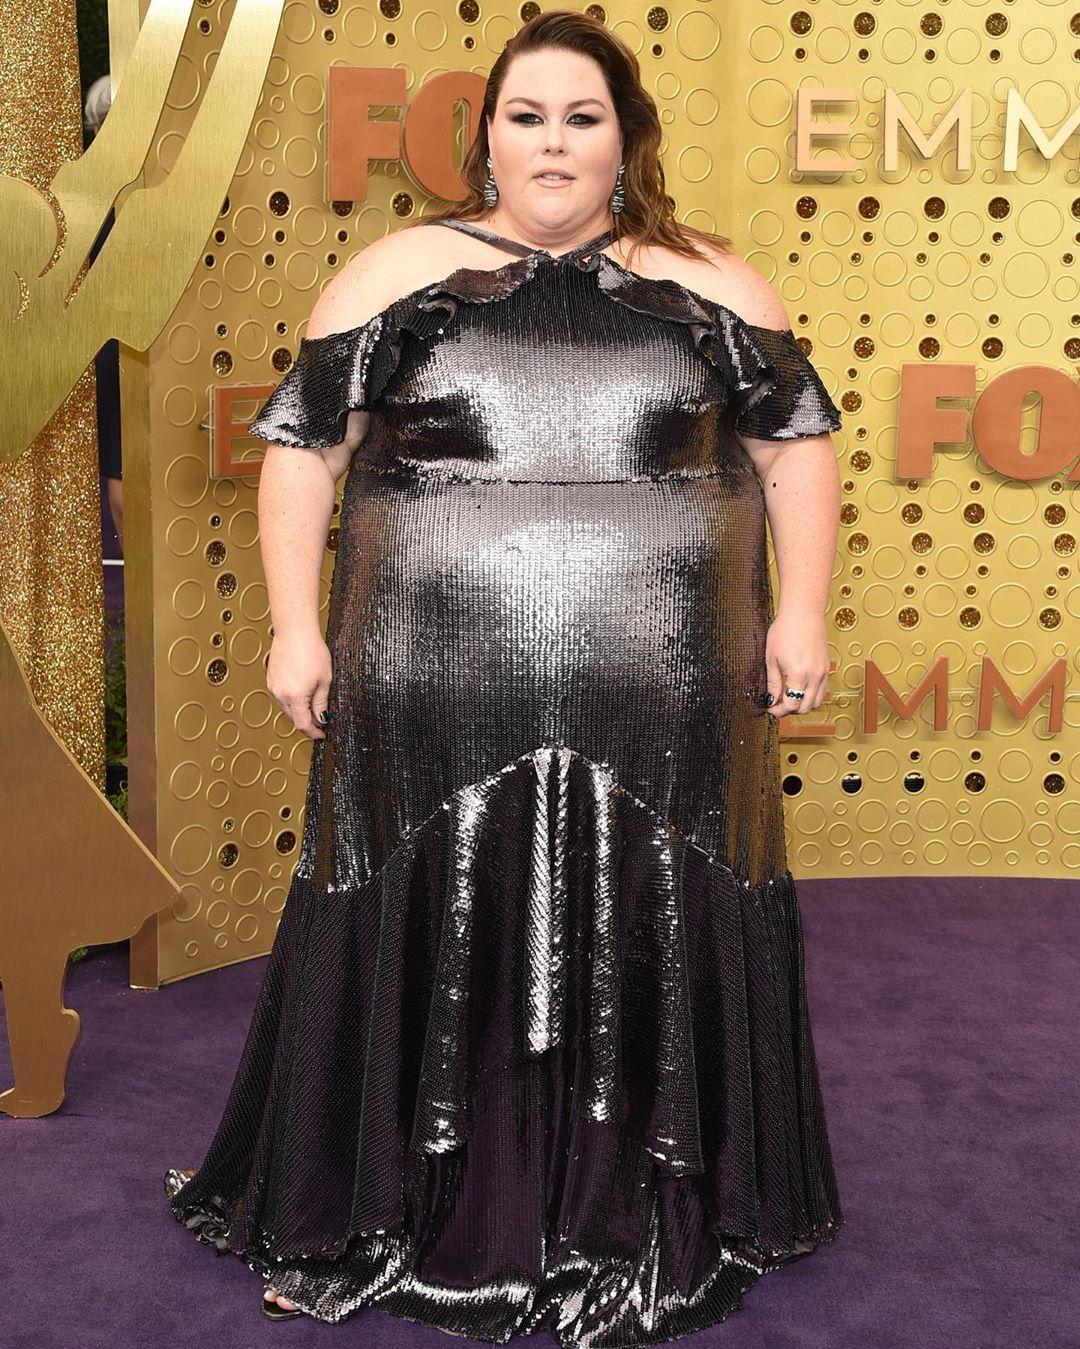 chrissy metz-Getty Images